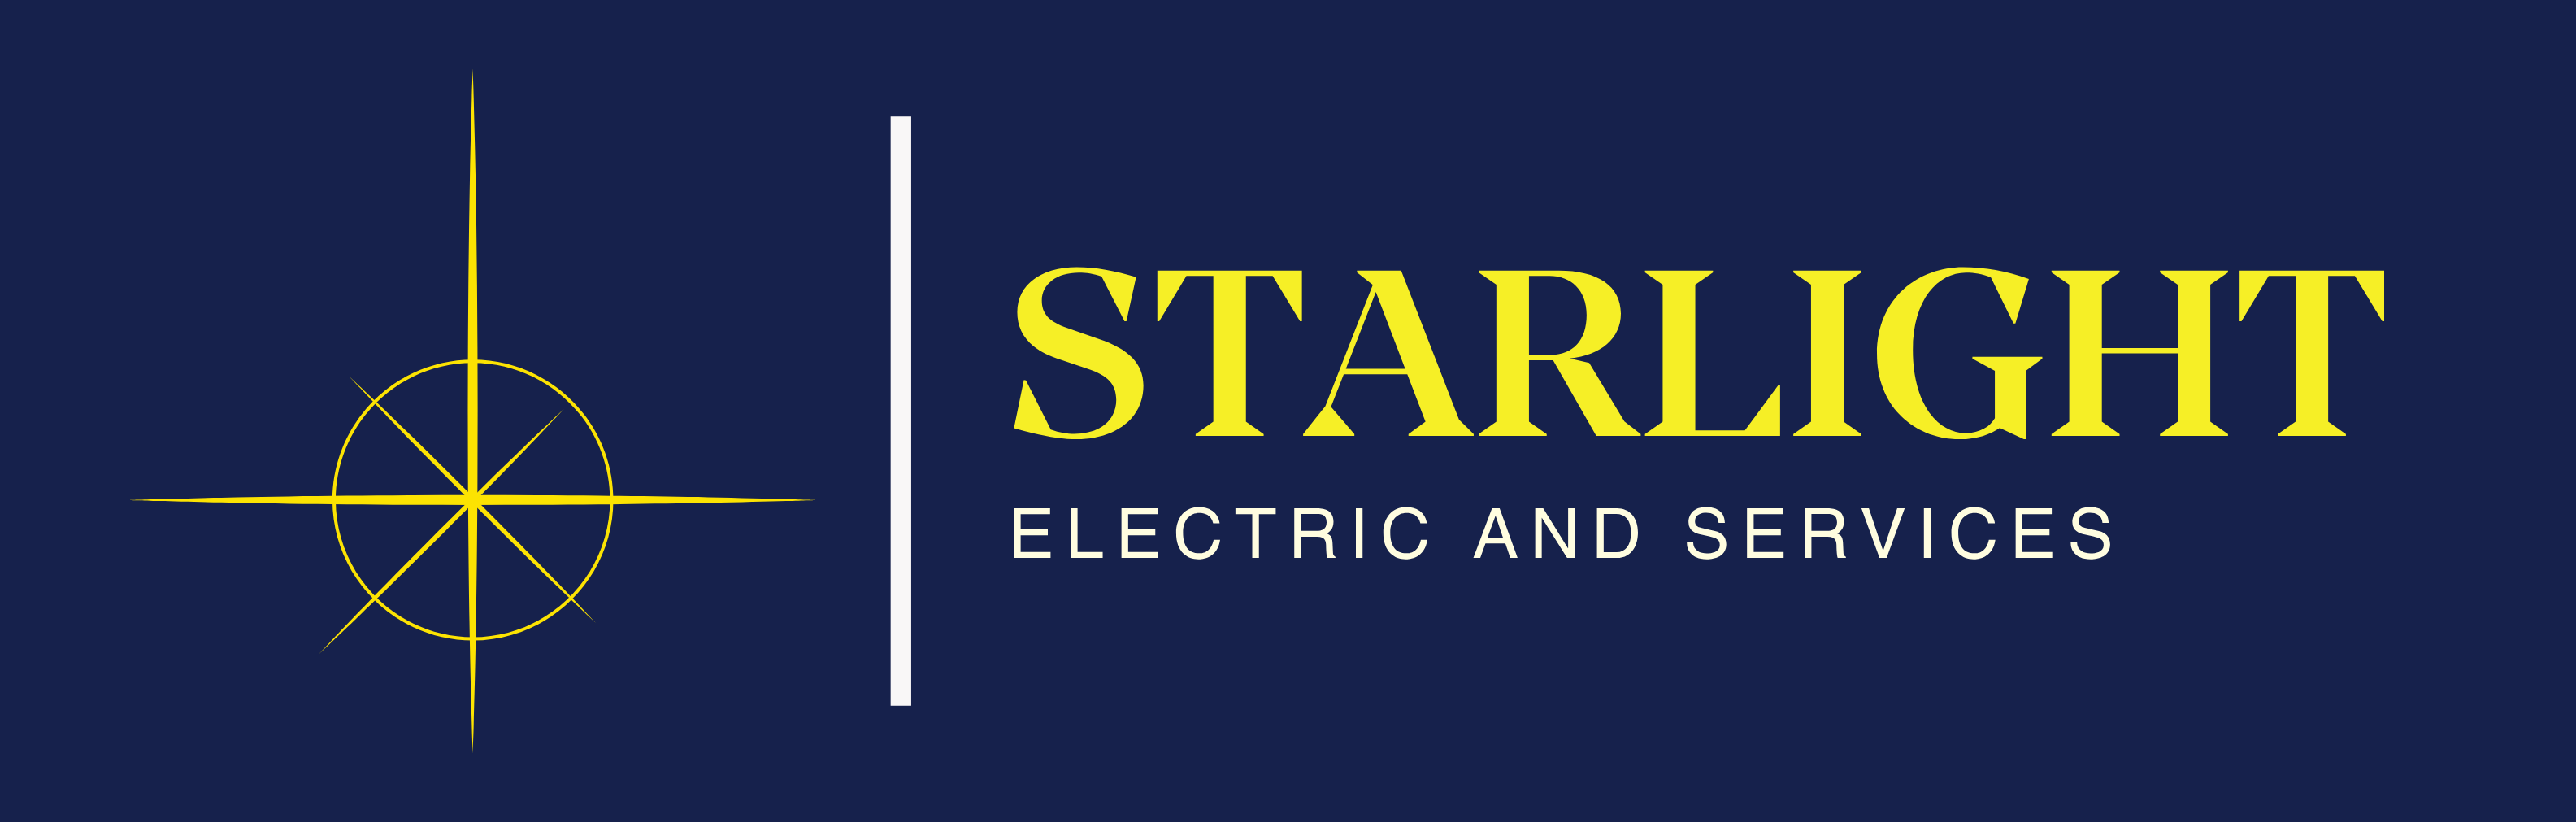 Starlight Electric and Services